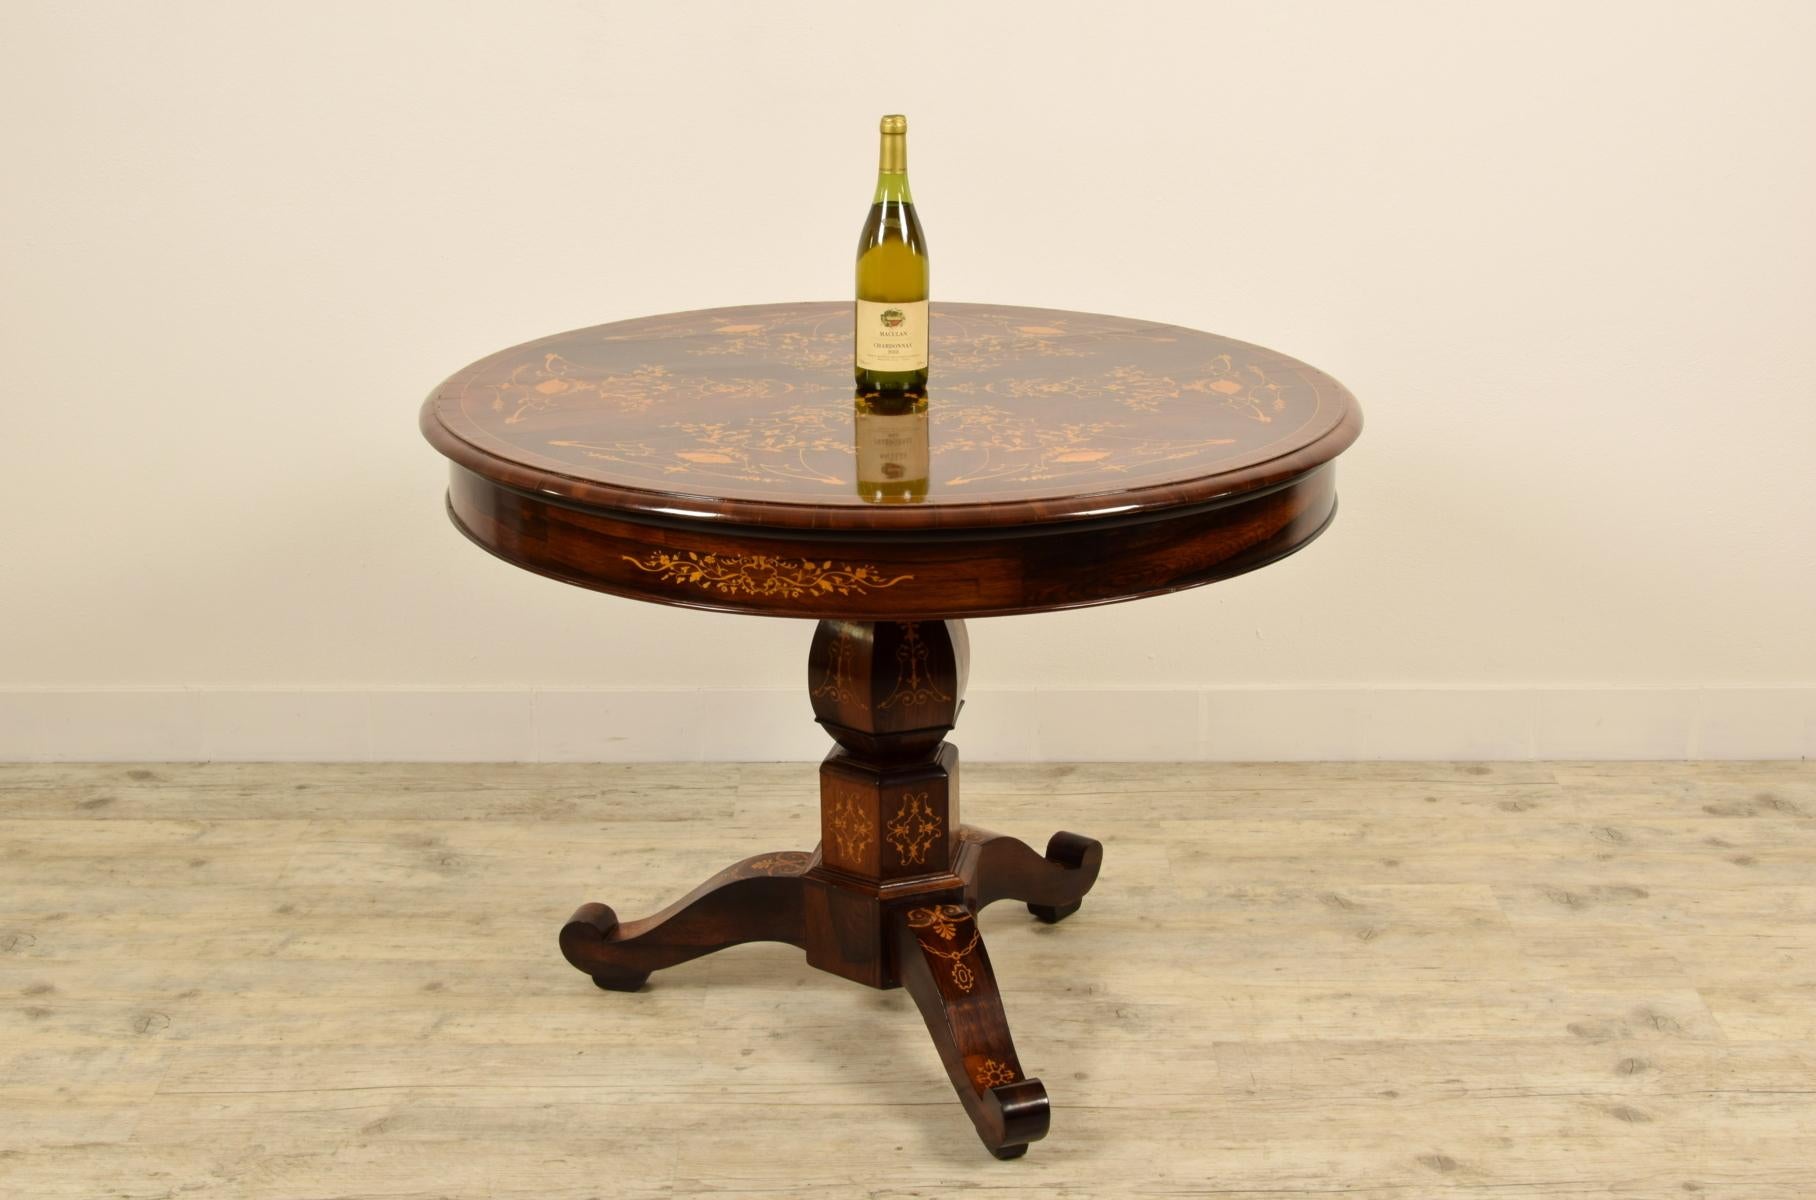 19th century French Charles X paved and inlaid centre table with round top

Elegant central table made in France in the Charles X period, paved with different woods. The circular plane rests on a tripod body with final volutes.
The refined wood